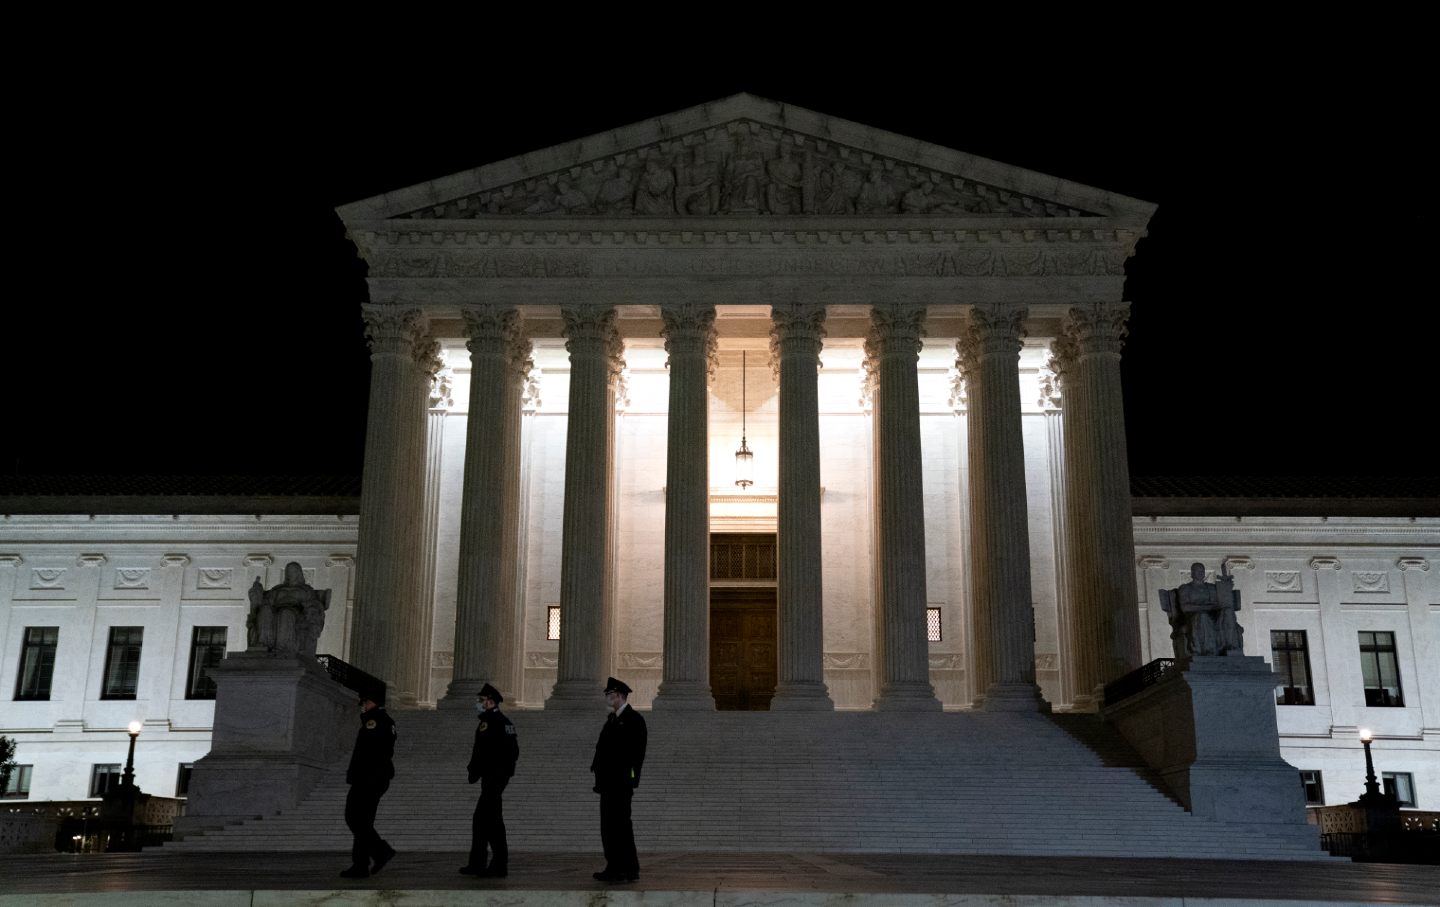 Three police officers stand outside the Supreme Court building at night